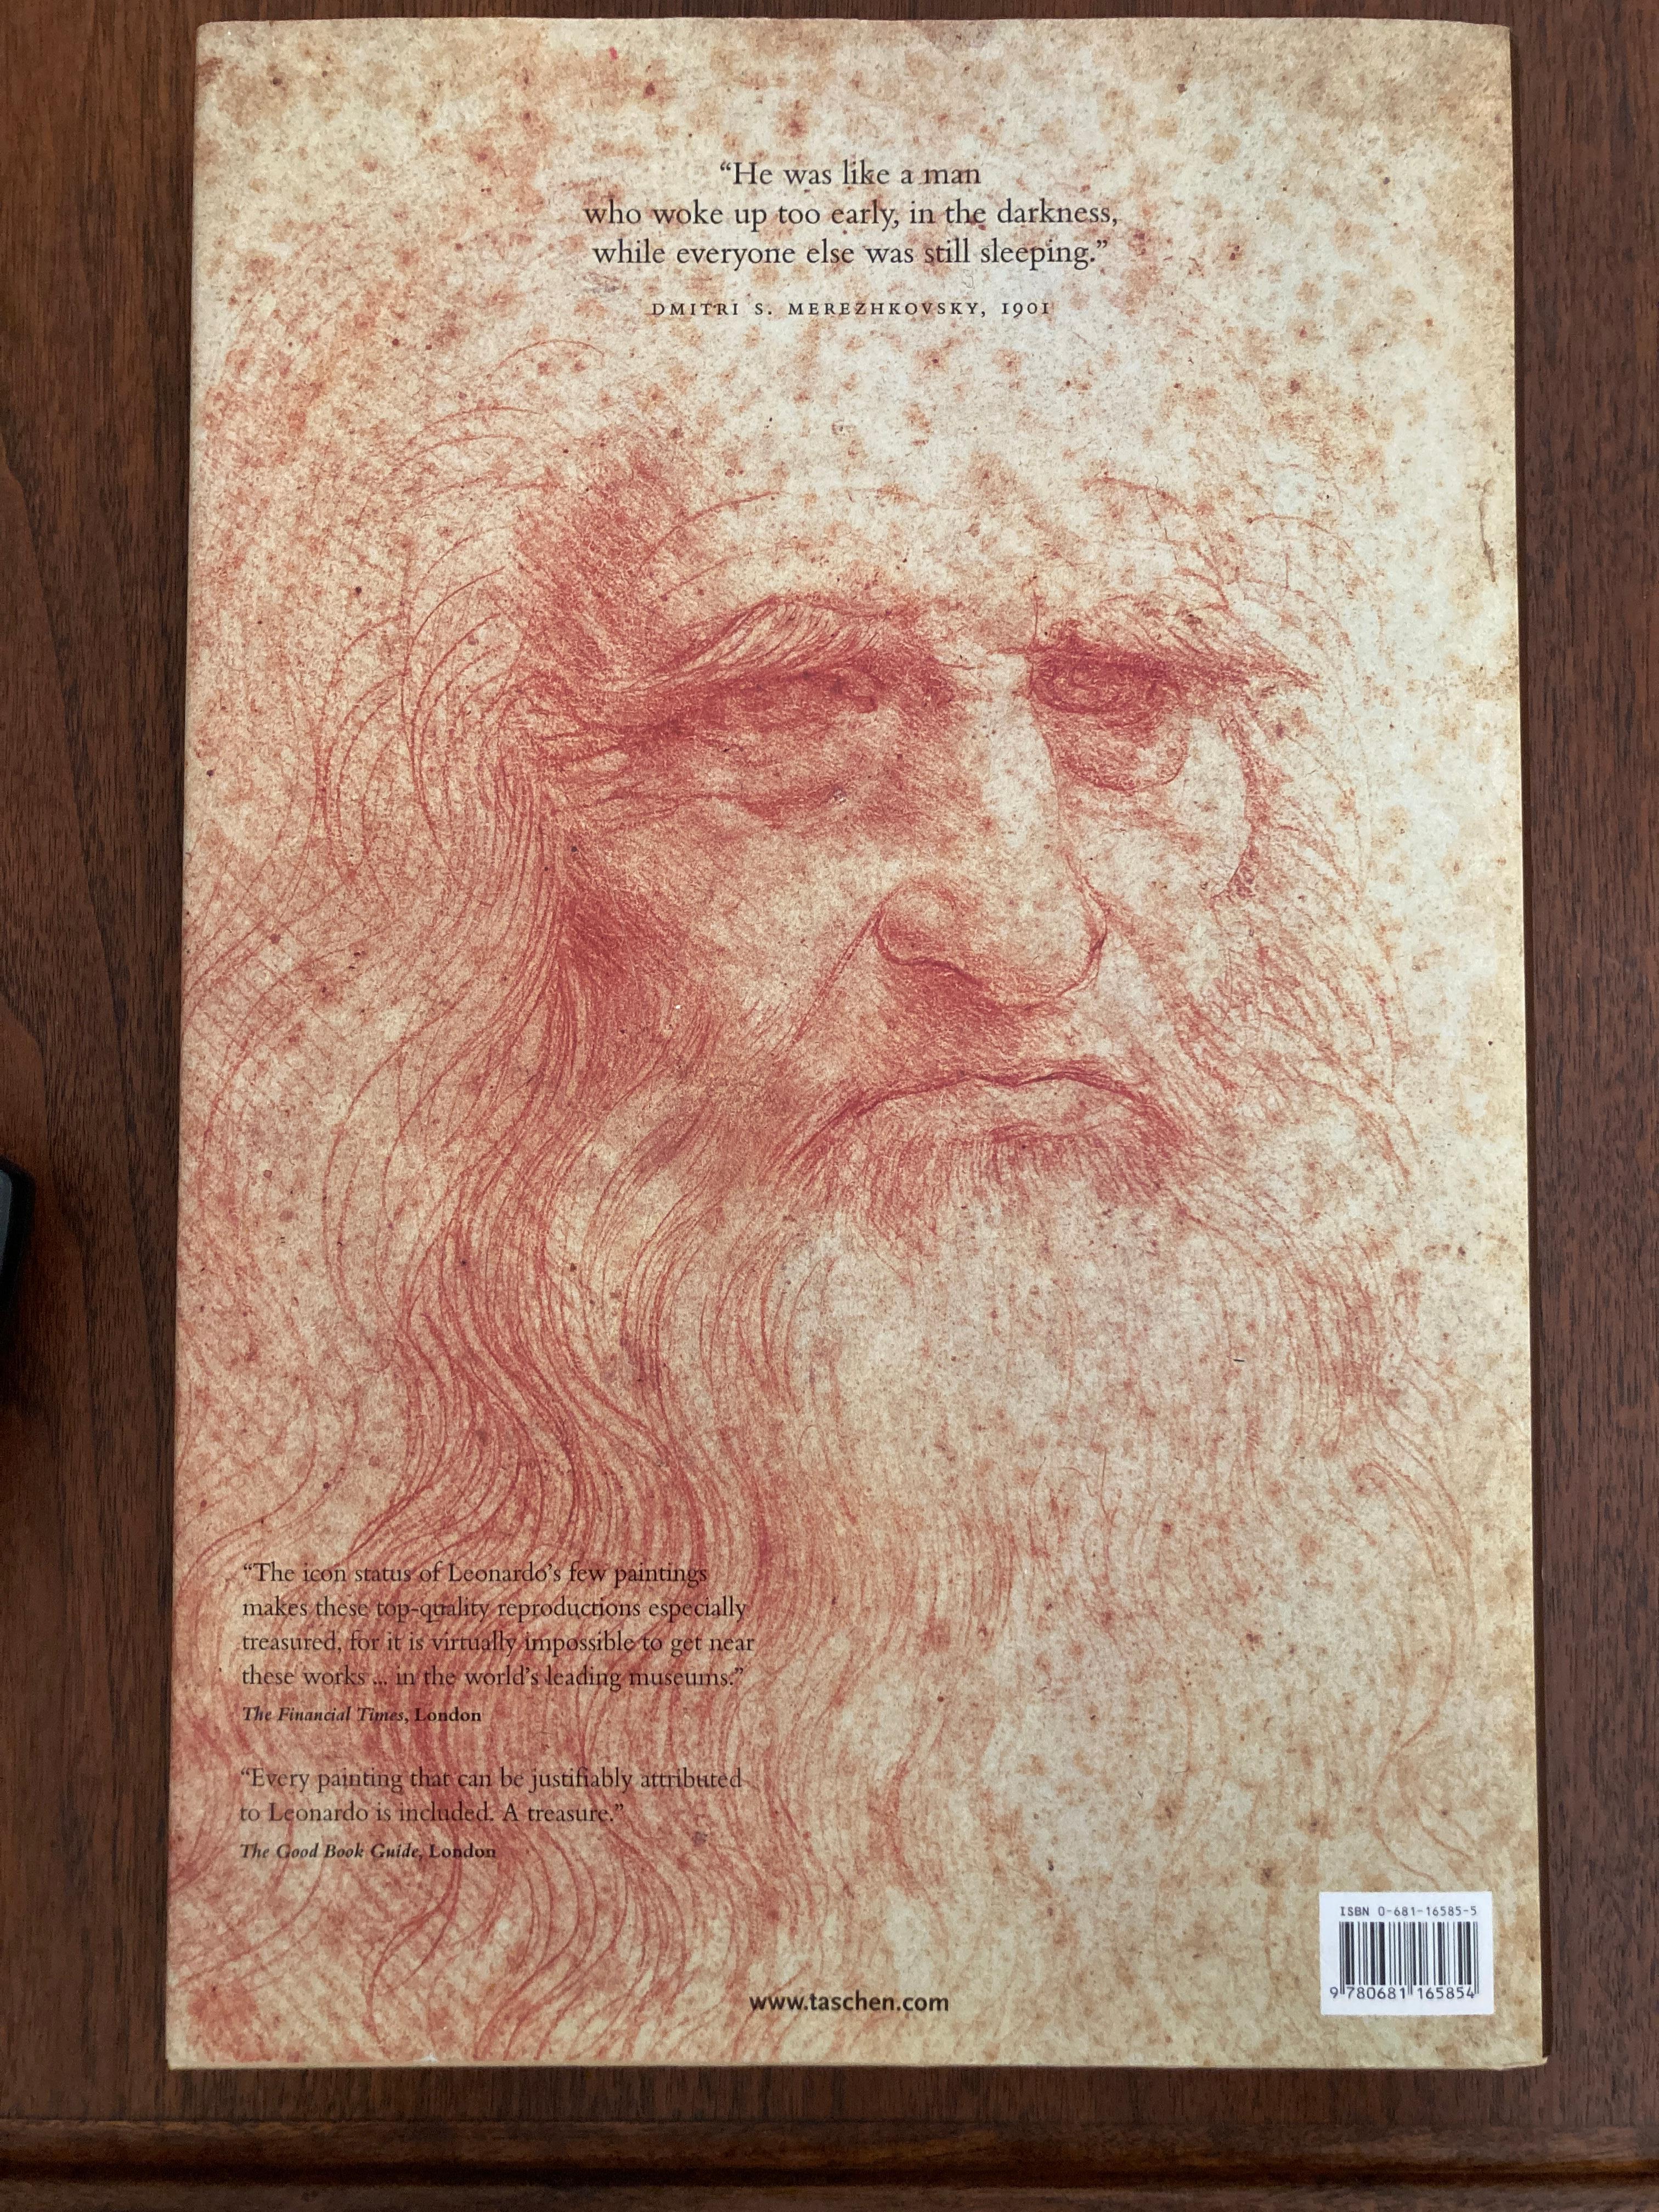 Leonardo da Vinci. The Complete Paintings .
Hardcover Book Coffee Table Art Book.
Da Vinci in detail: Leonardo's life and work all paintings! 
One of the most fully achieved human beings who has ever lived.
Leonardo da Vinci(1452 1519) is